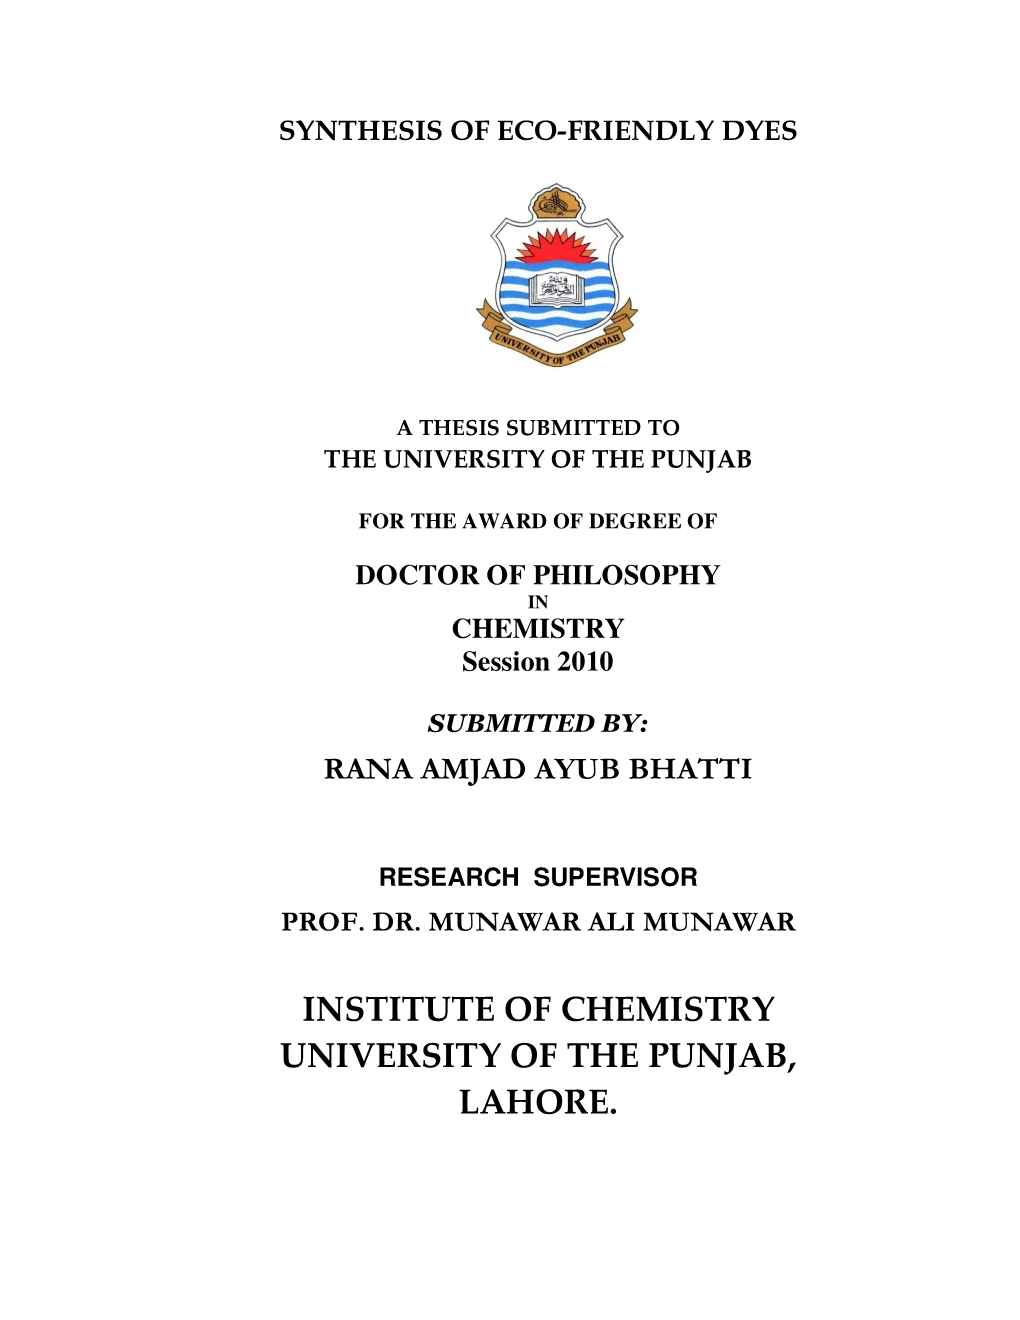 Institute of Chemistry University of the Punjab, Lahore